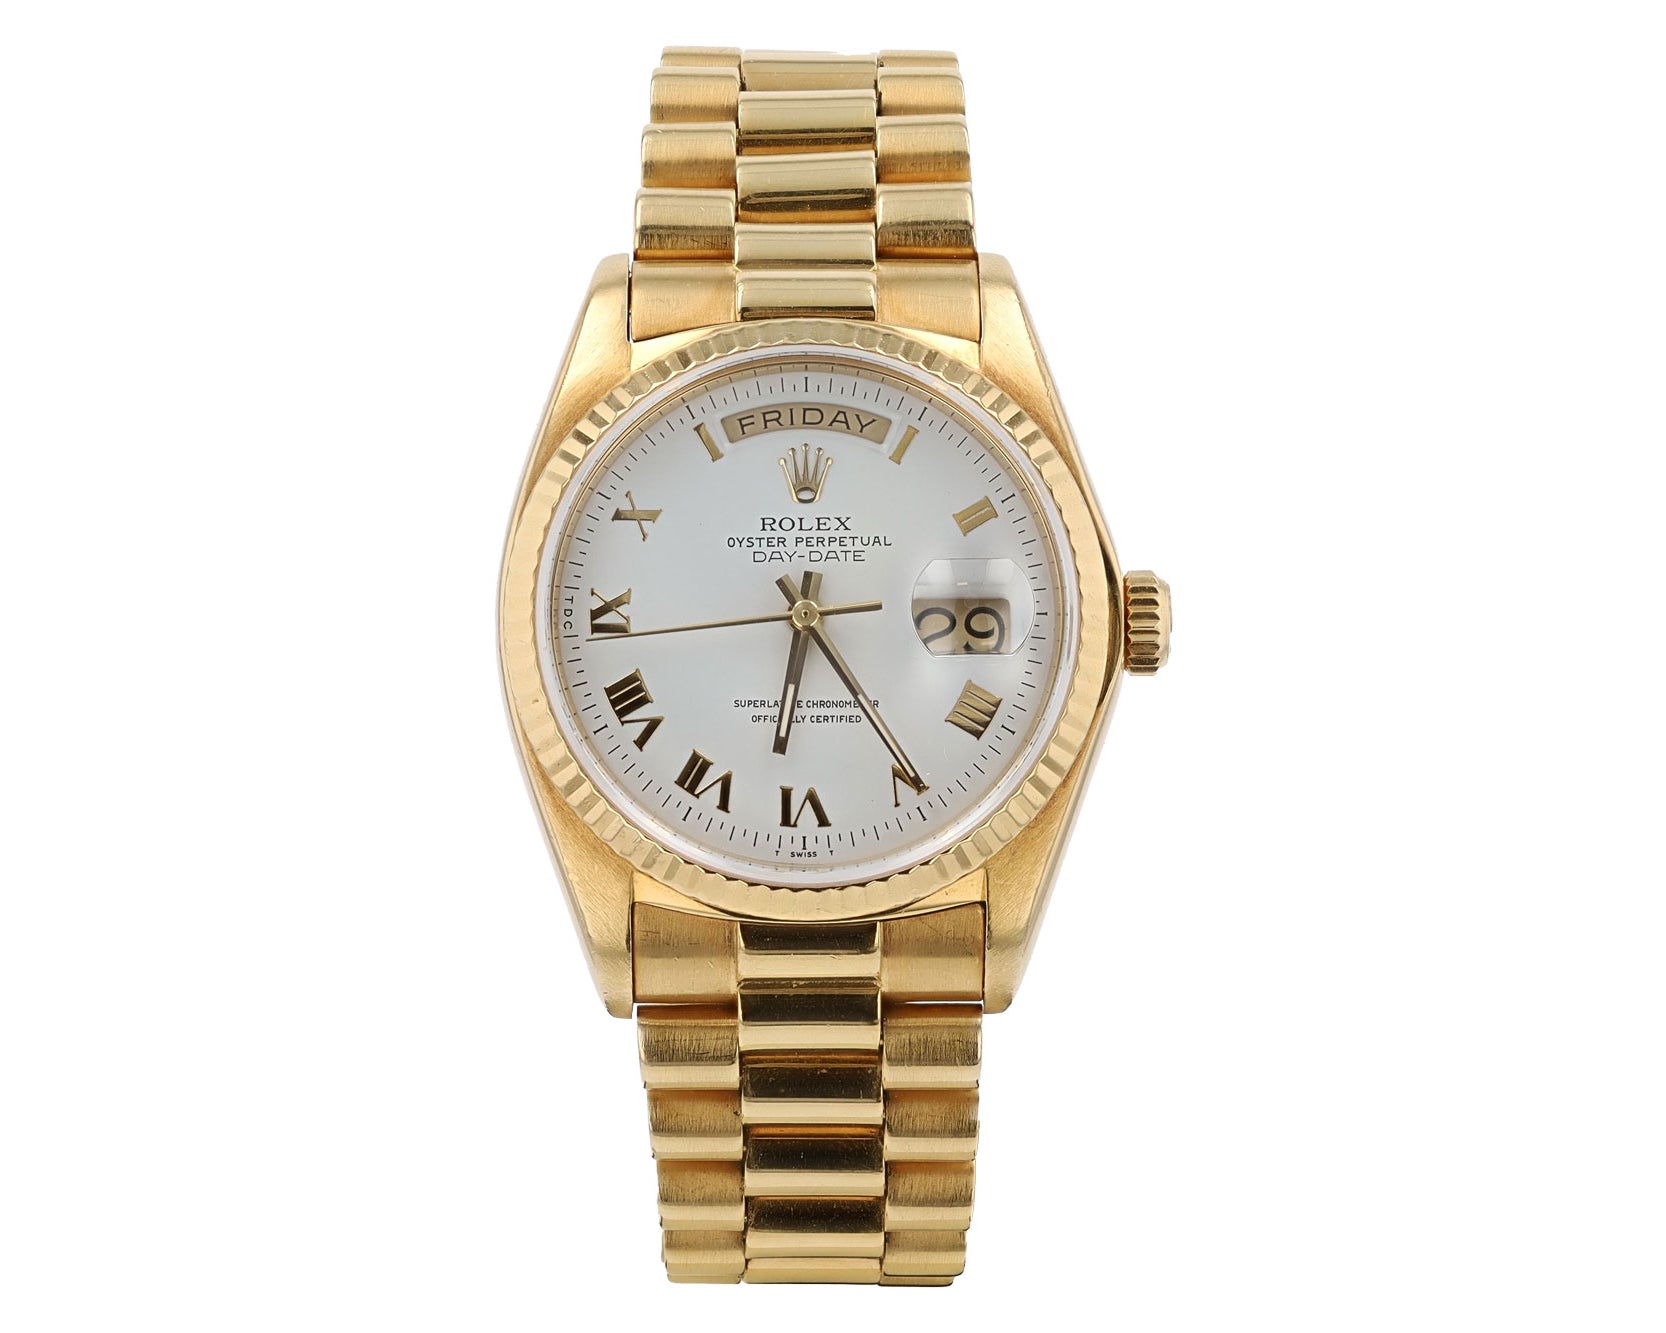 Rolex Day-Date President 18k Yellow Gold #18038 36mm Watch